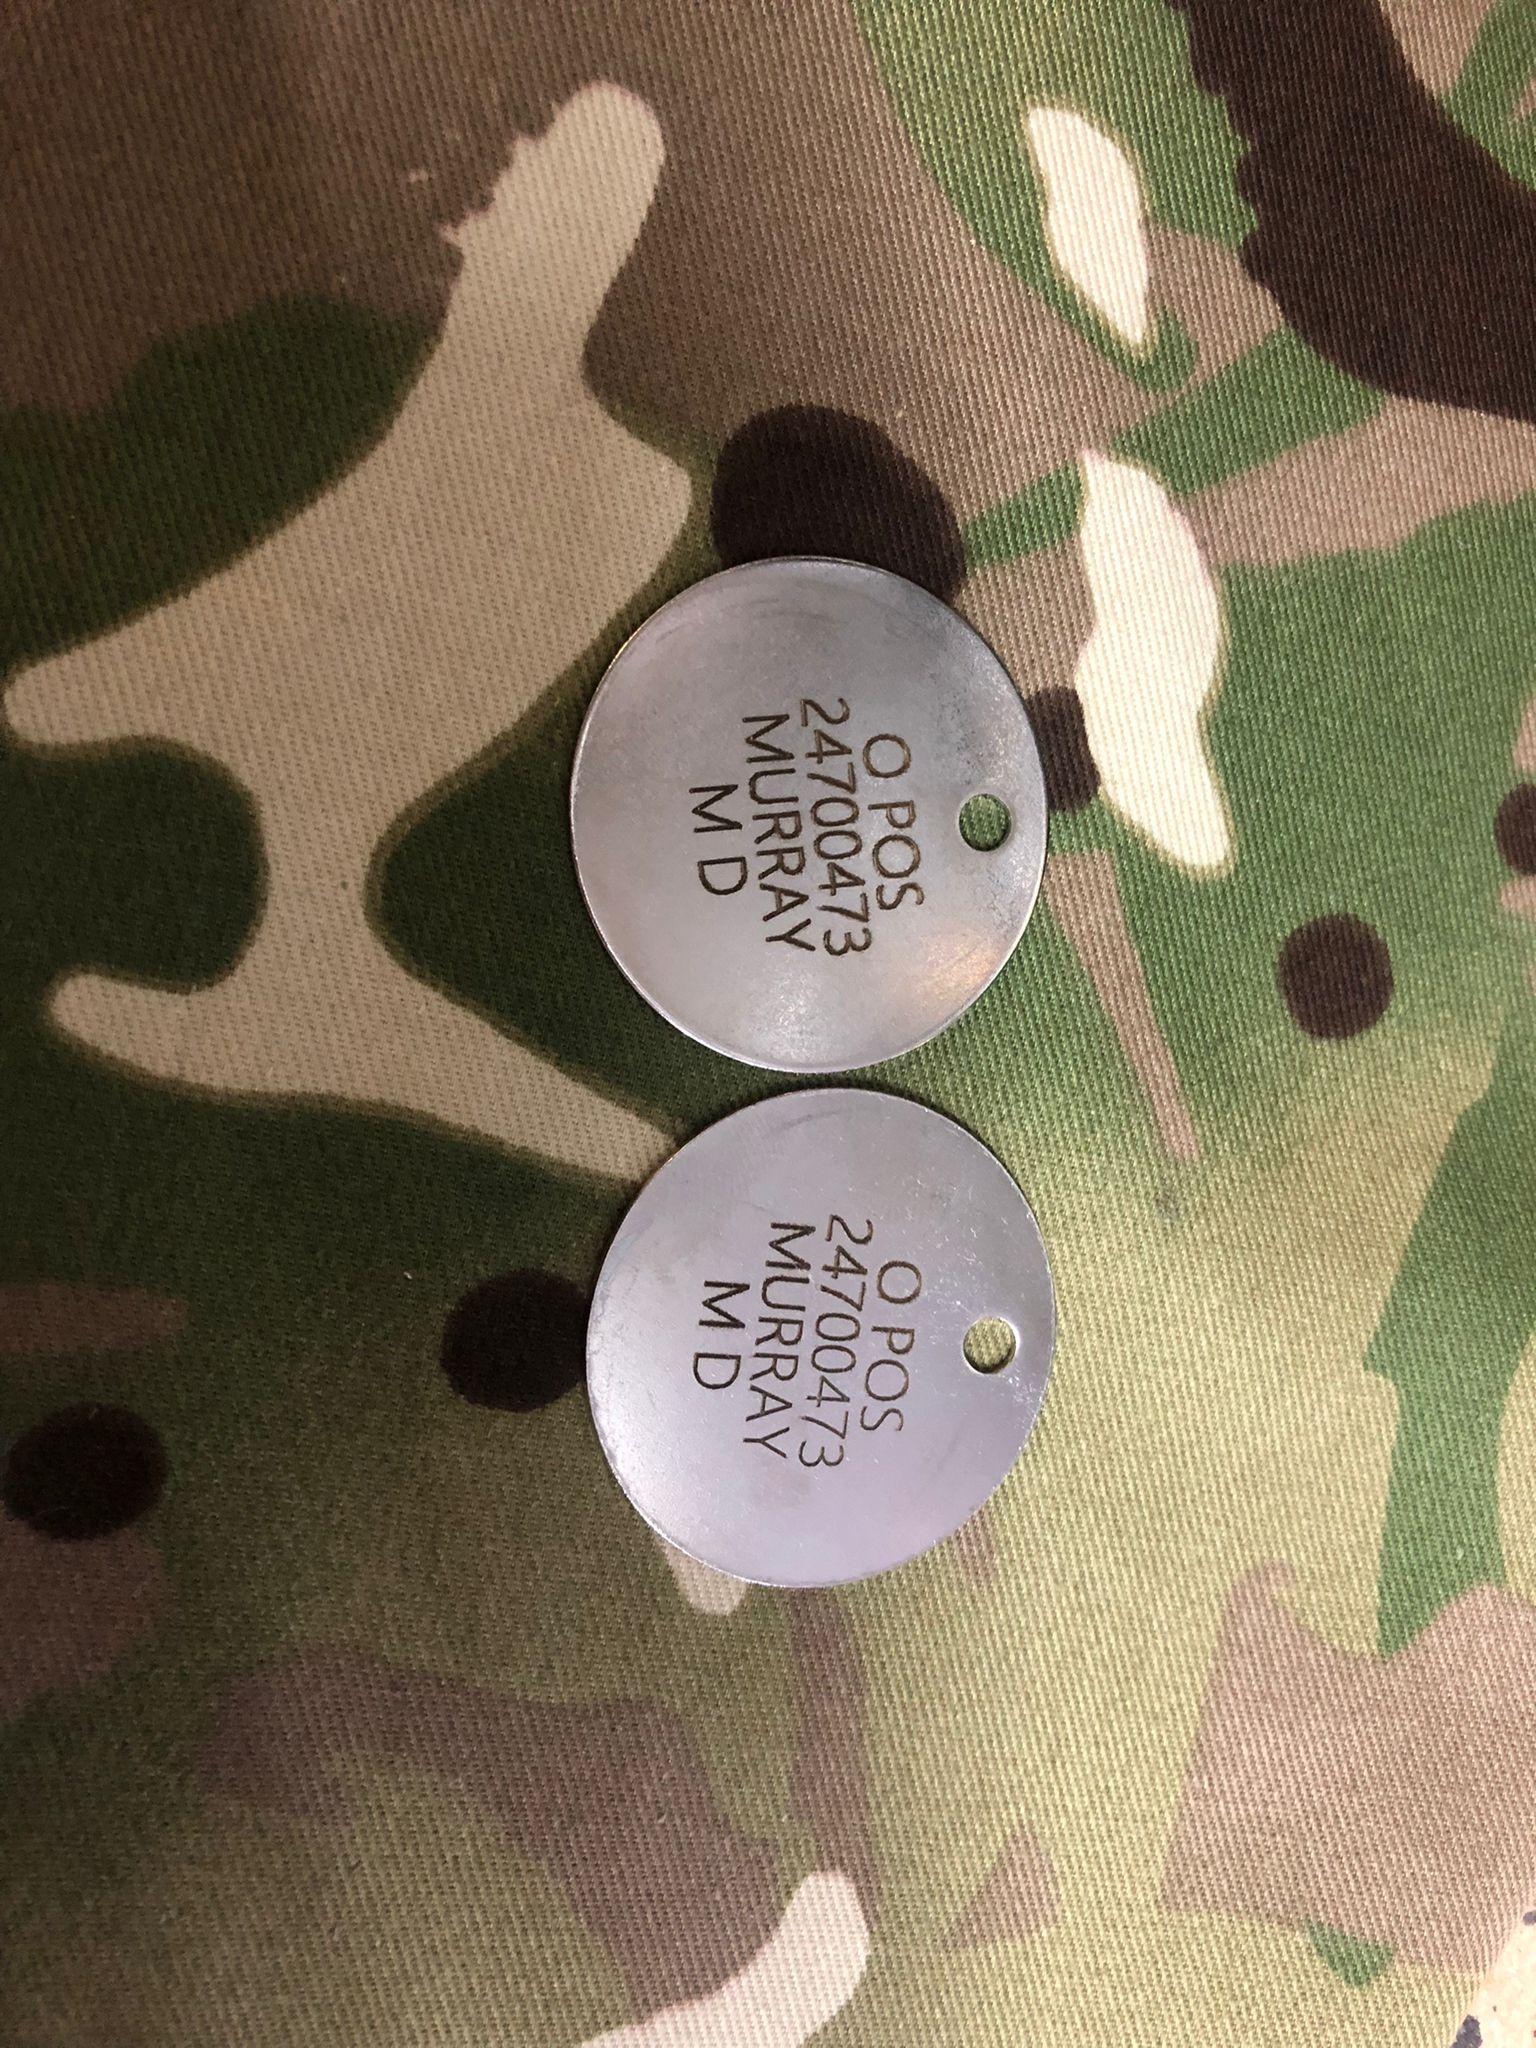 do british army have dog tags